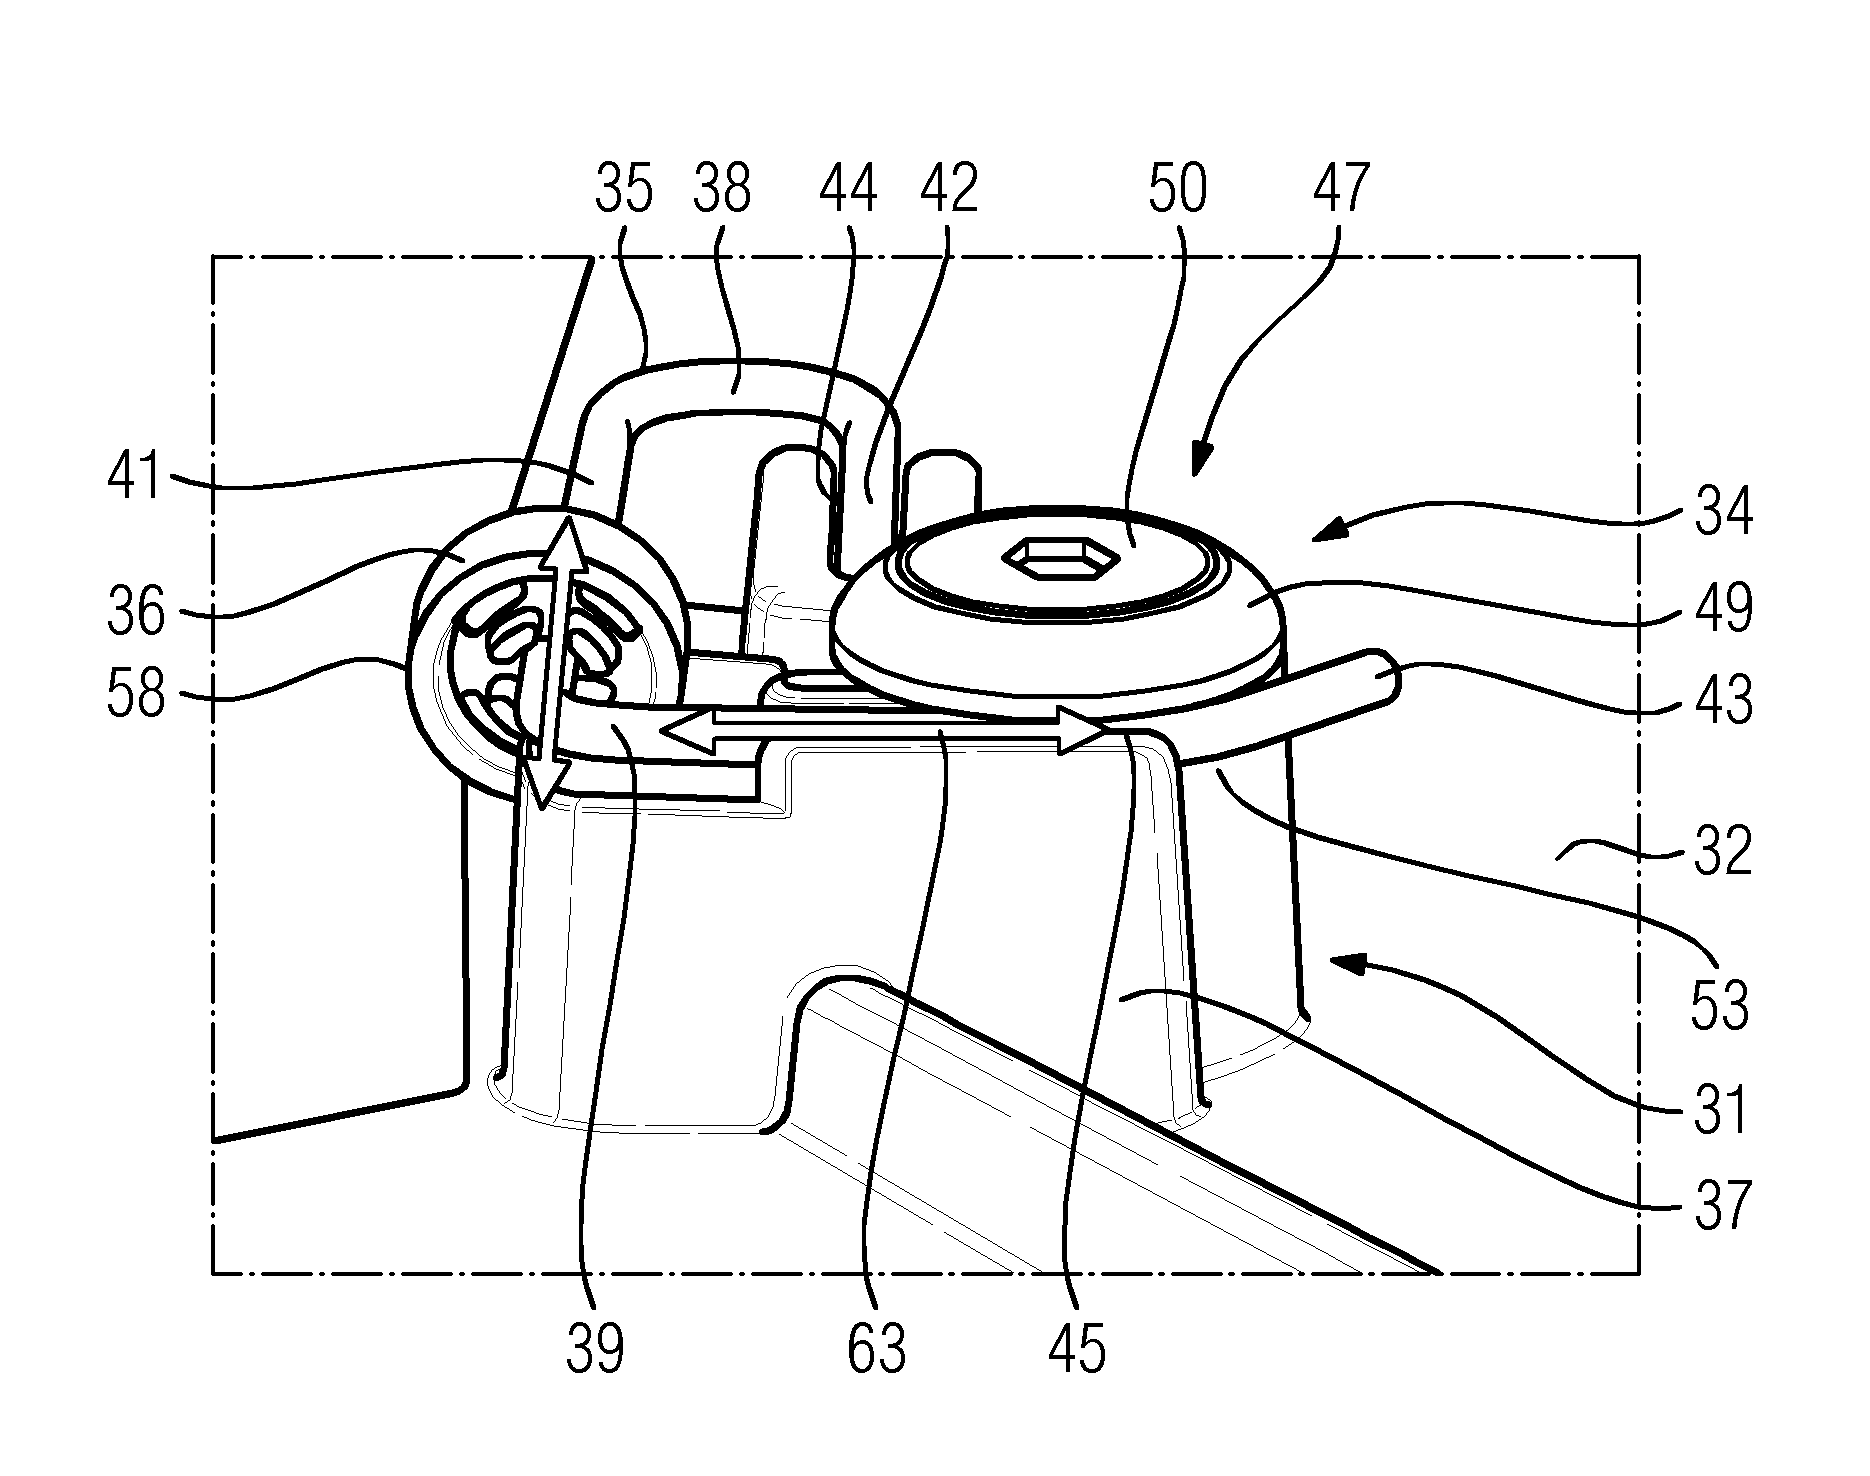 Latching apparatus and also medical imaging apparatus with the latching apparatus